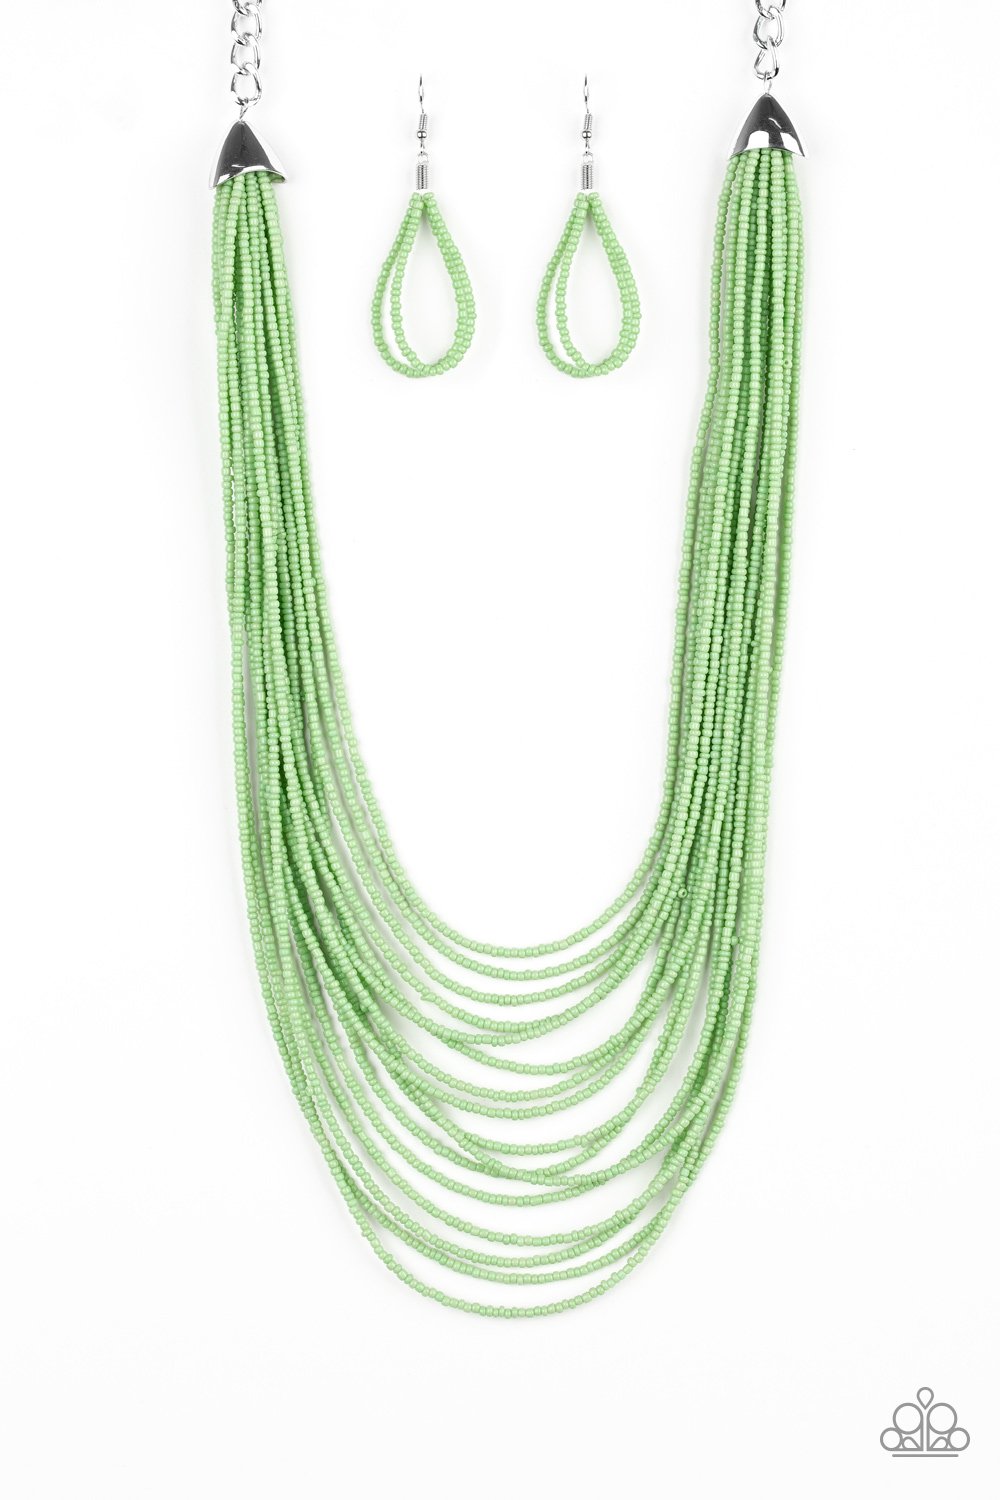 Peacefully Pacific - Green seed bead necklace